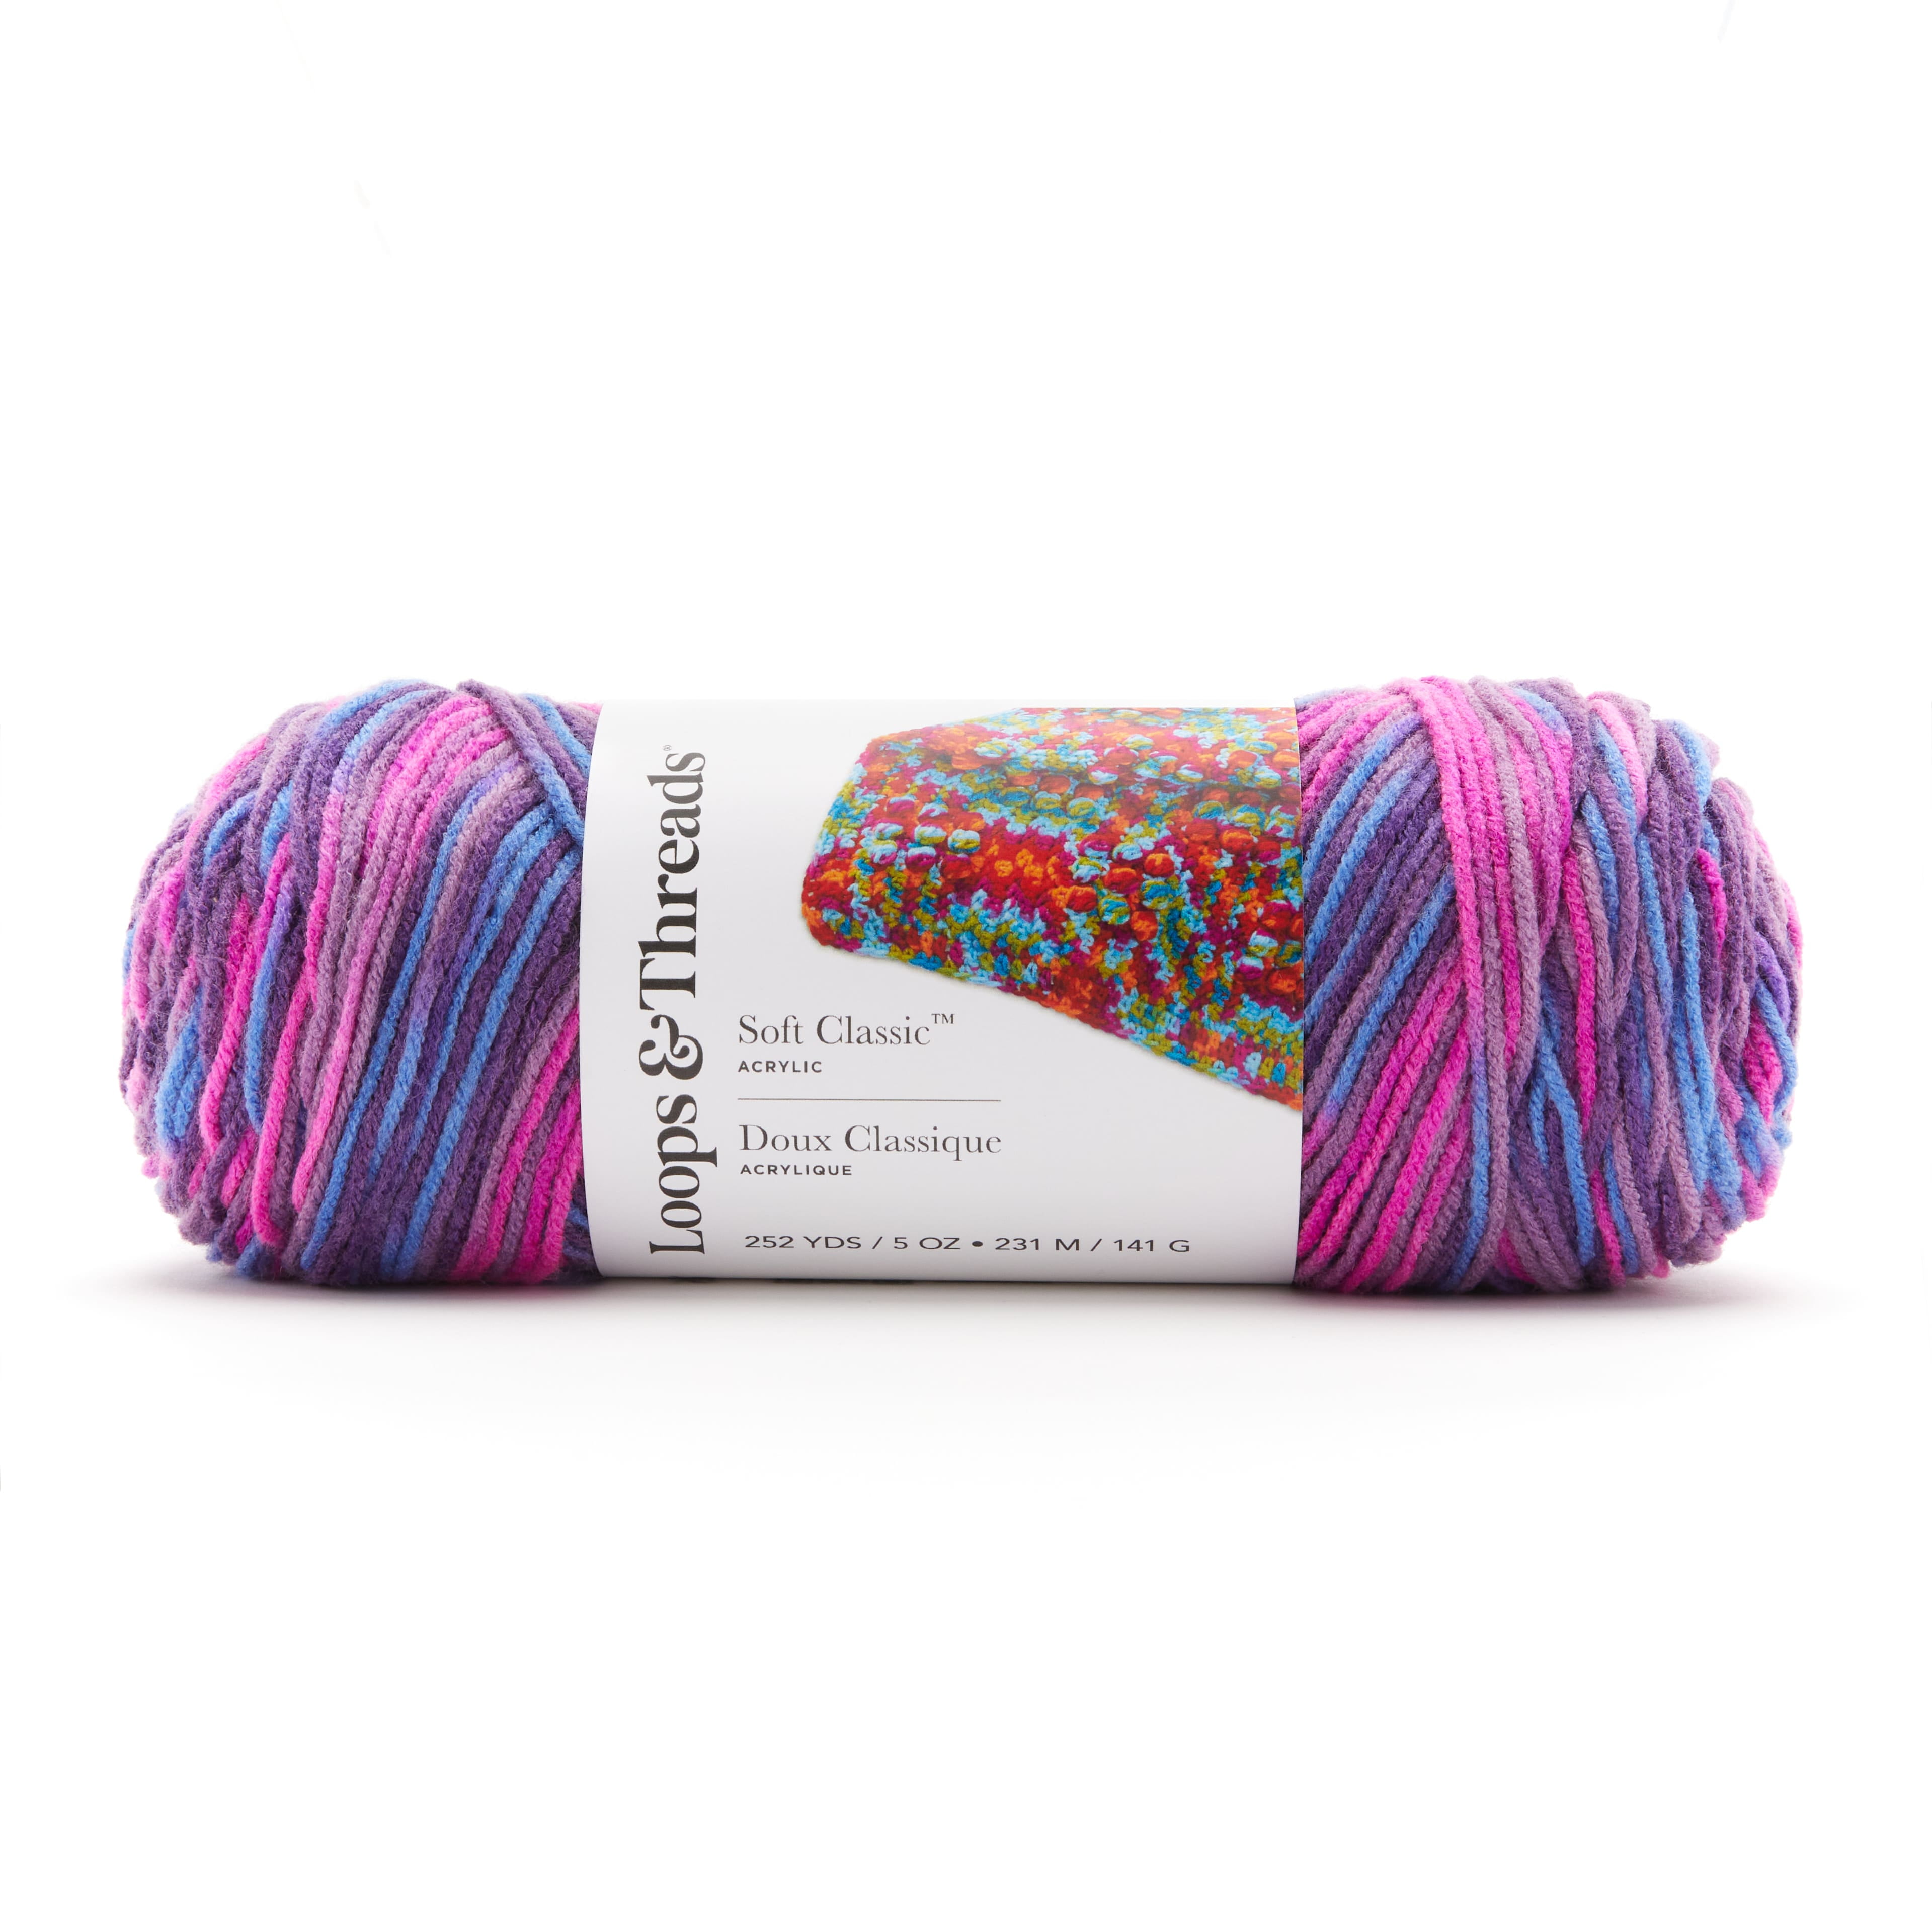 Soft Classic Multi Ombre Yarn by Loops & Threads - Multicolor Yarn for  Knitting, Crochet, Weaving, Arts & Crafts - Orchard Mist, Bulk 12 Pack